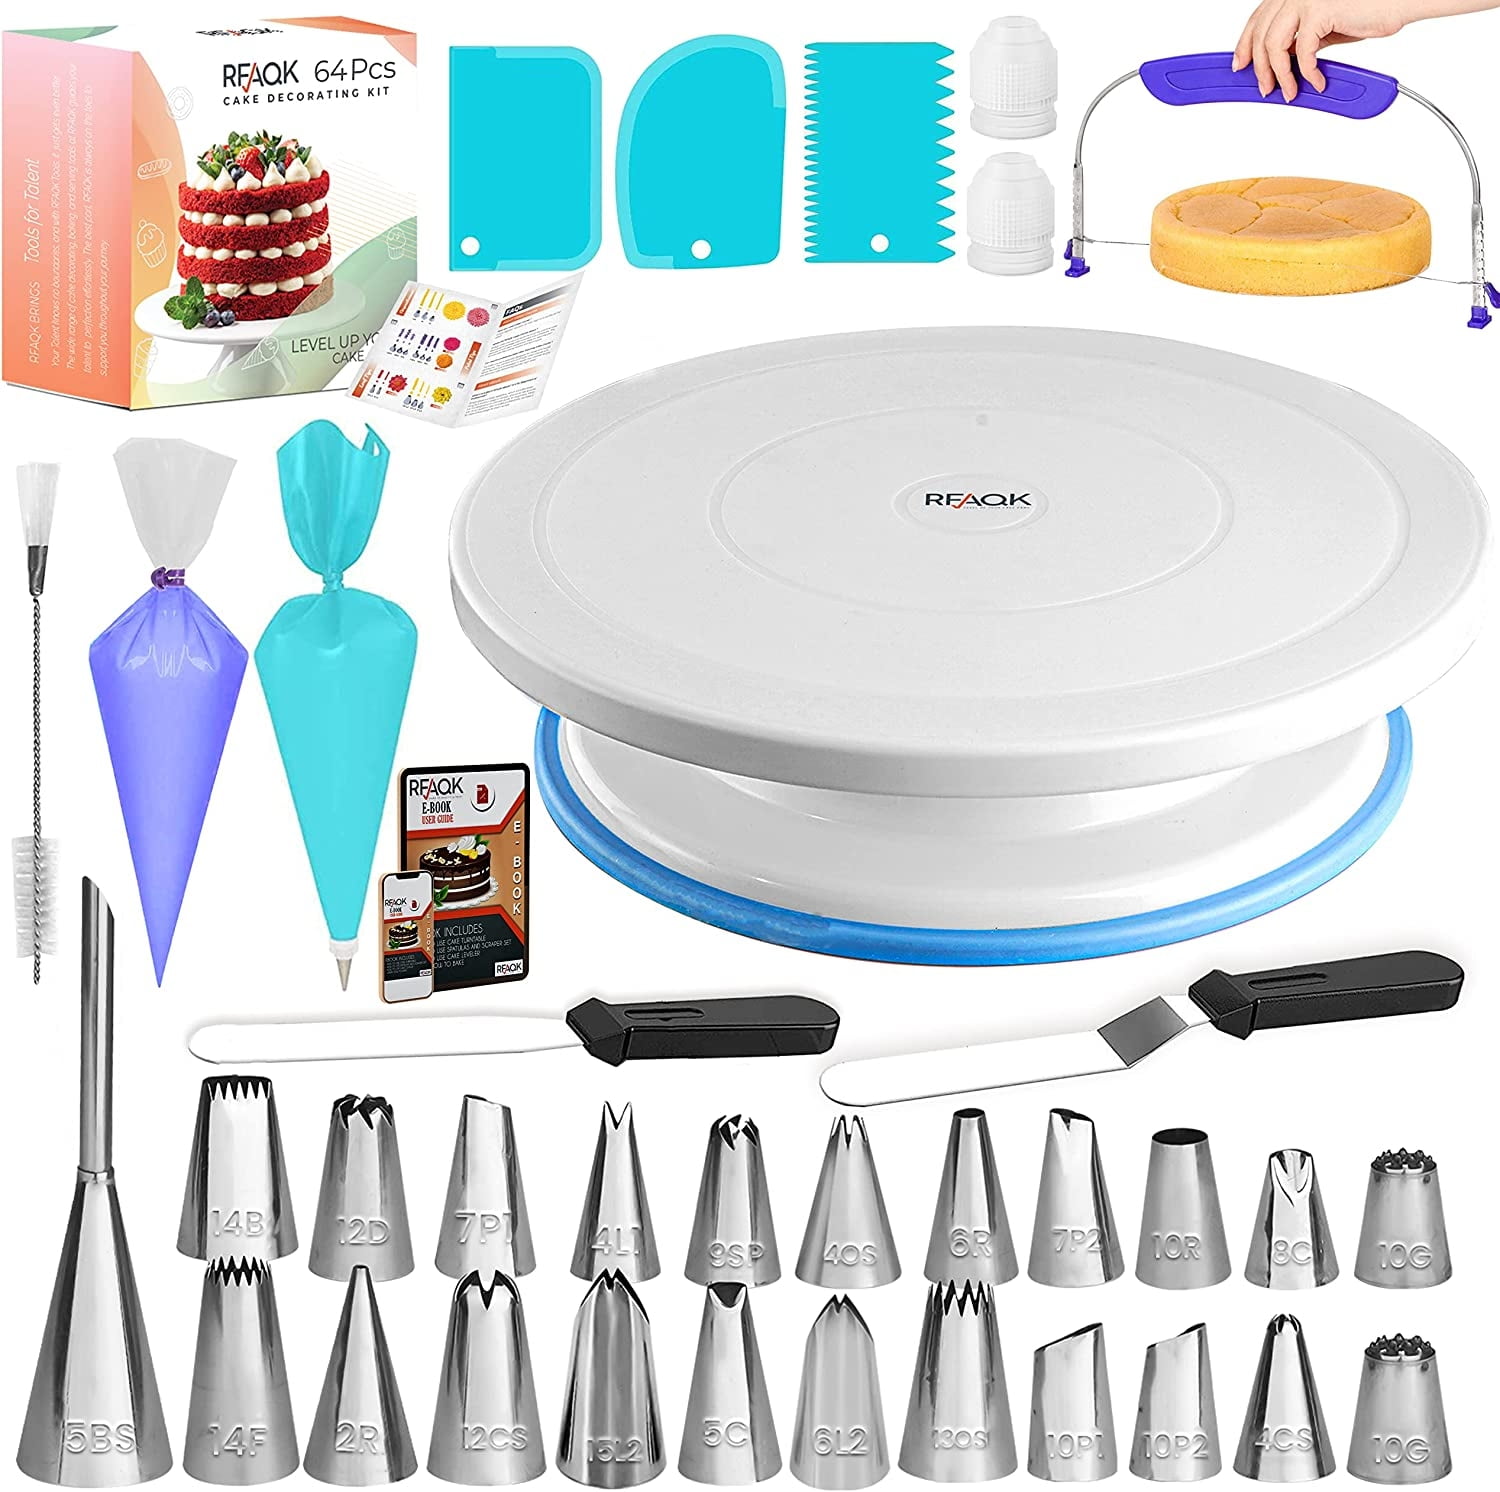 Kootek All-In-One Cake Decorating Kit: Perfect for Beginners